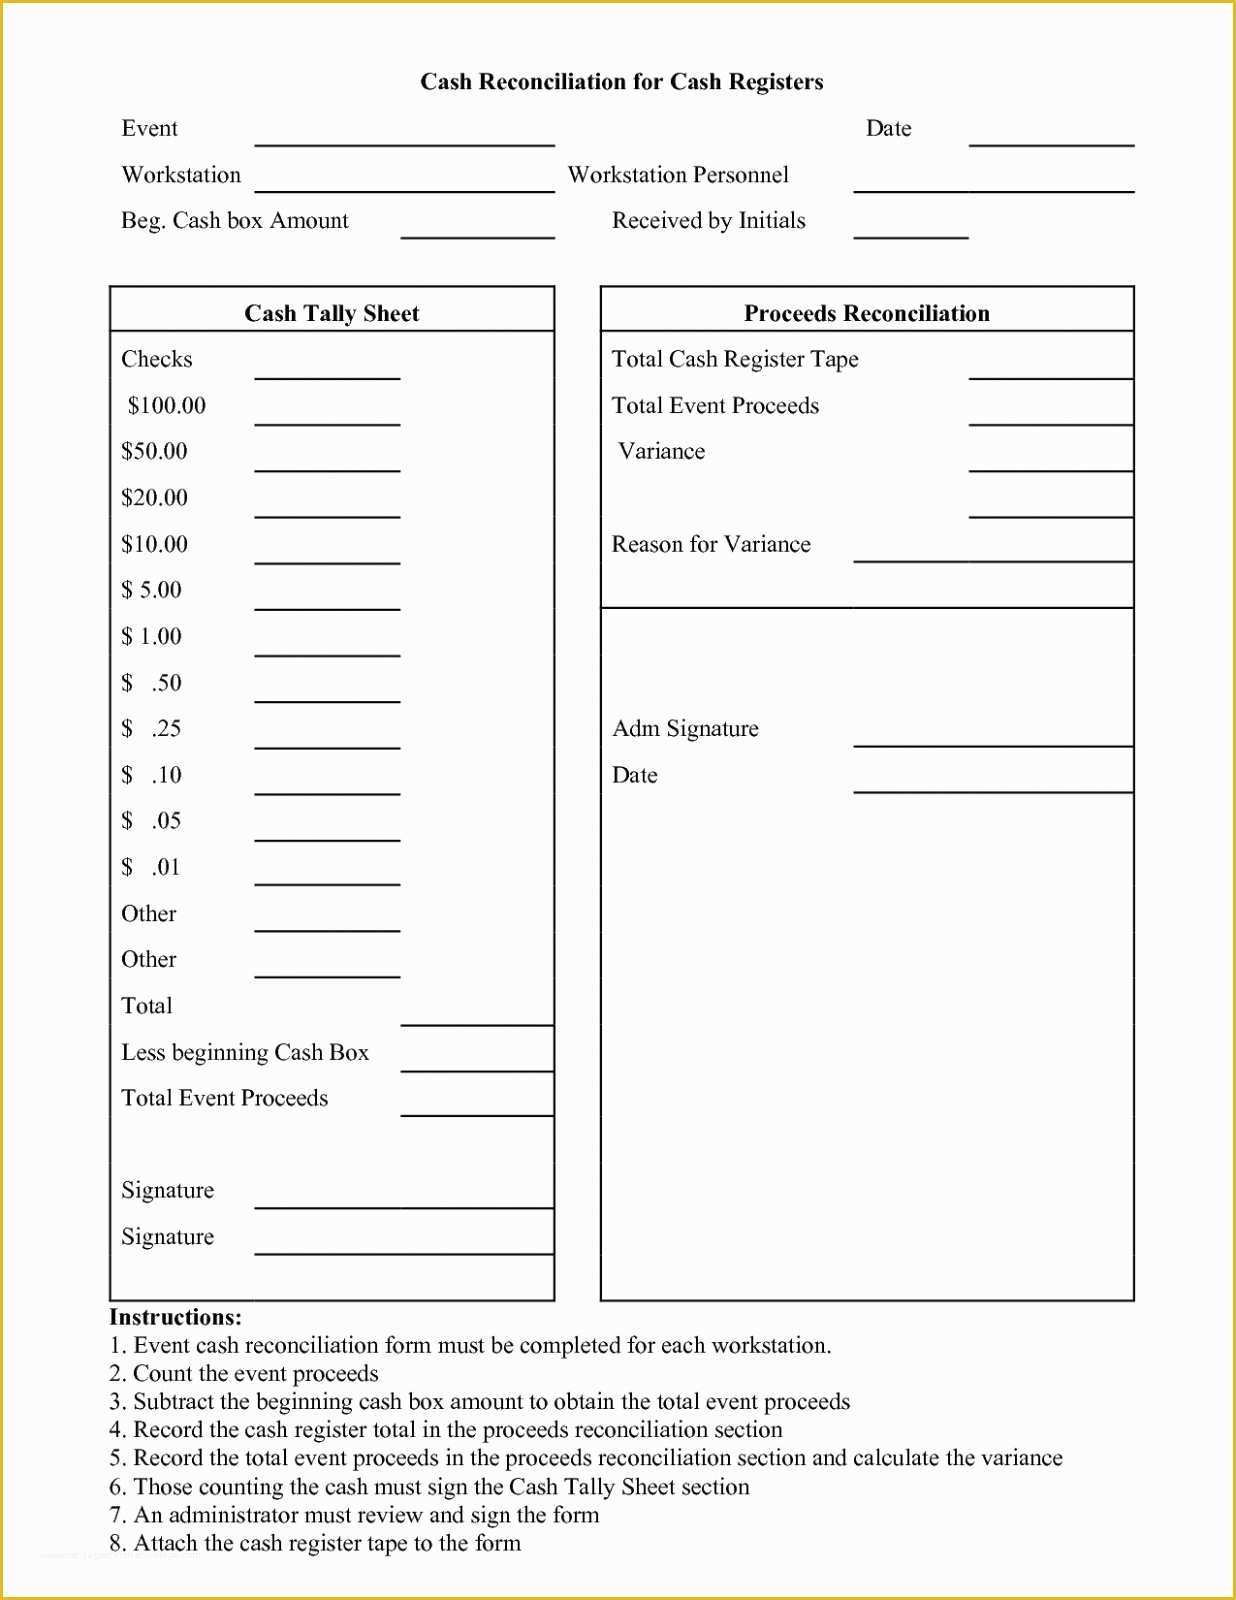 Cash Sheet Template Free Of Cash Register Balance Sheet Template Free Daily for